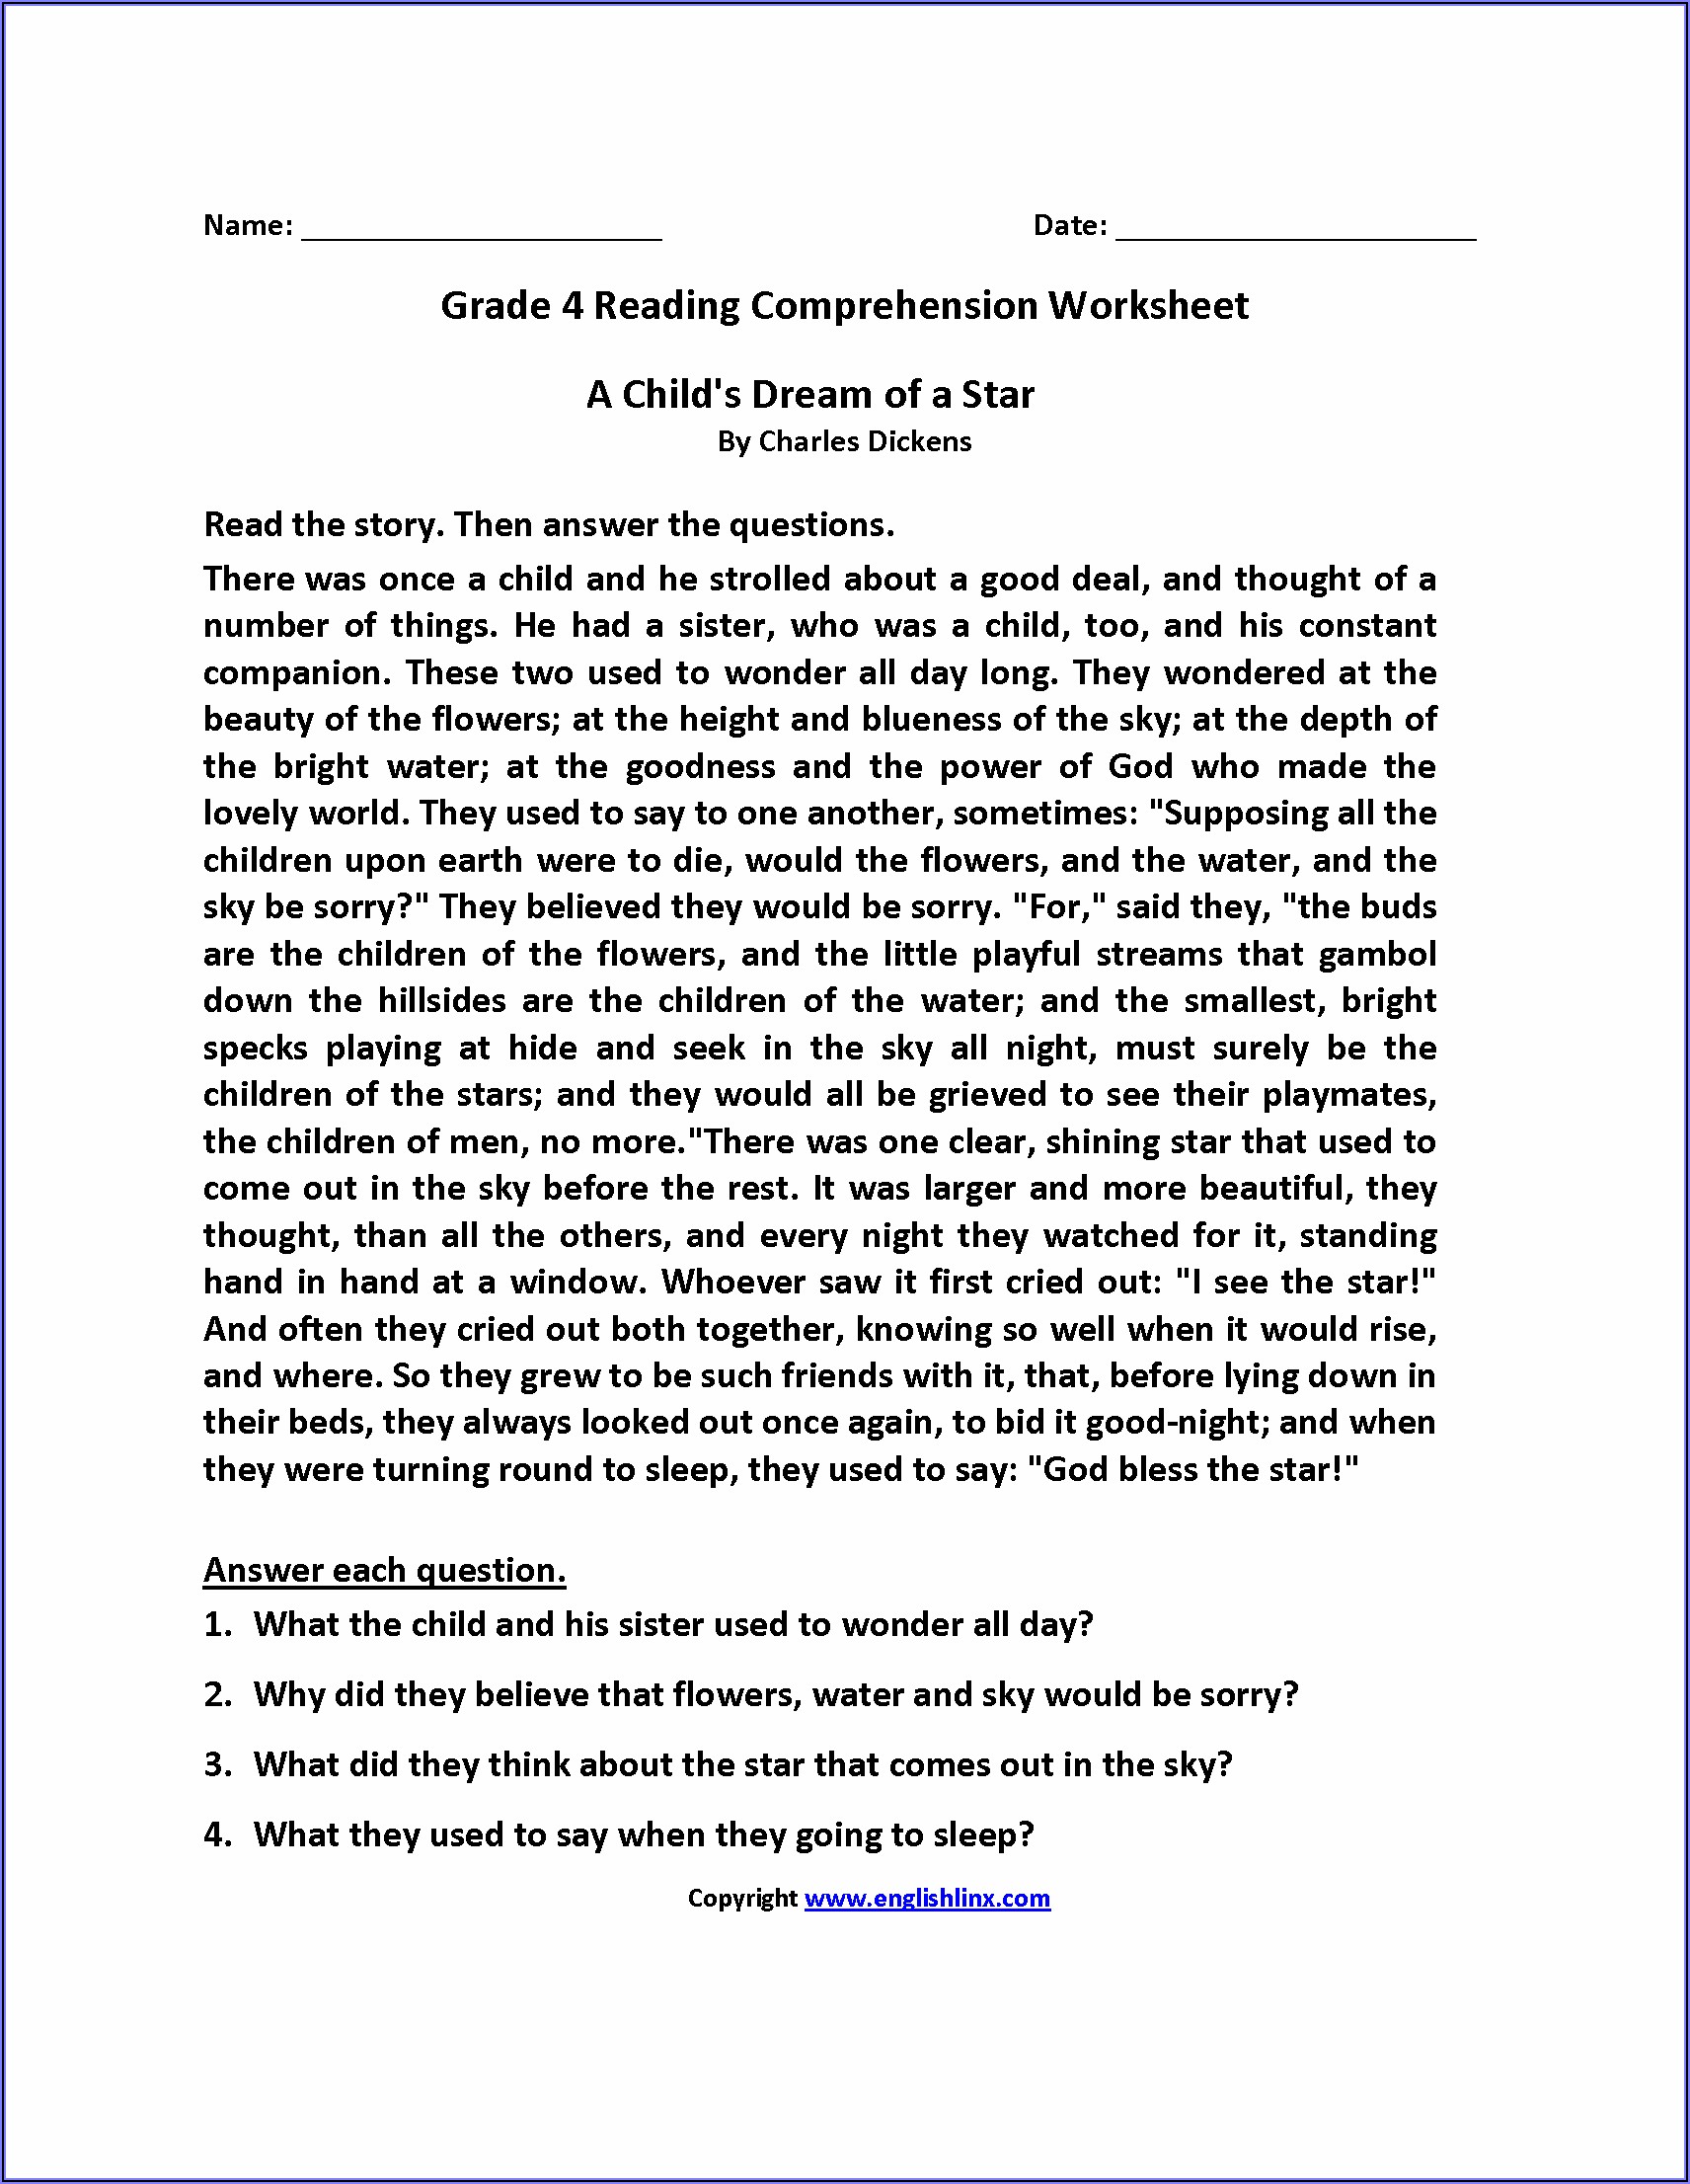 Reading Comprehension Worksheets For Grade 4 With Answers Pdf